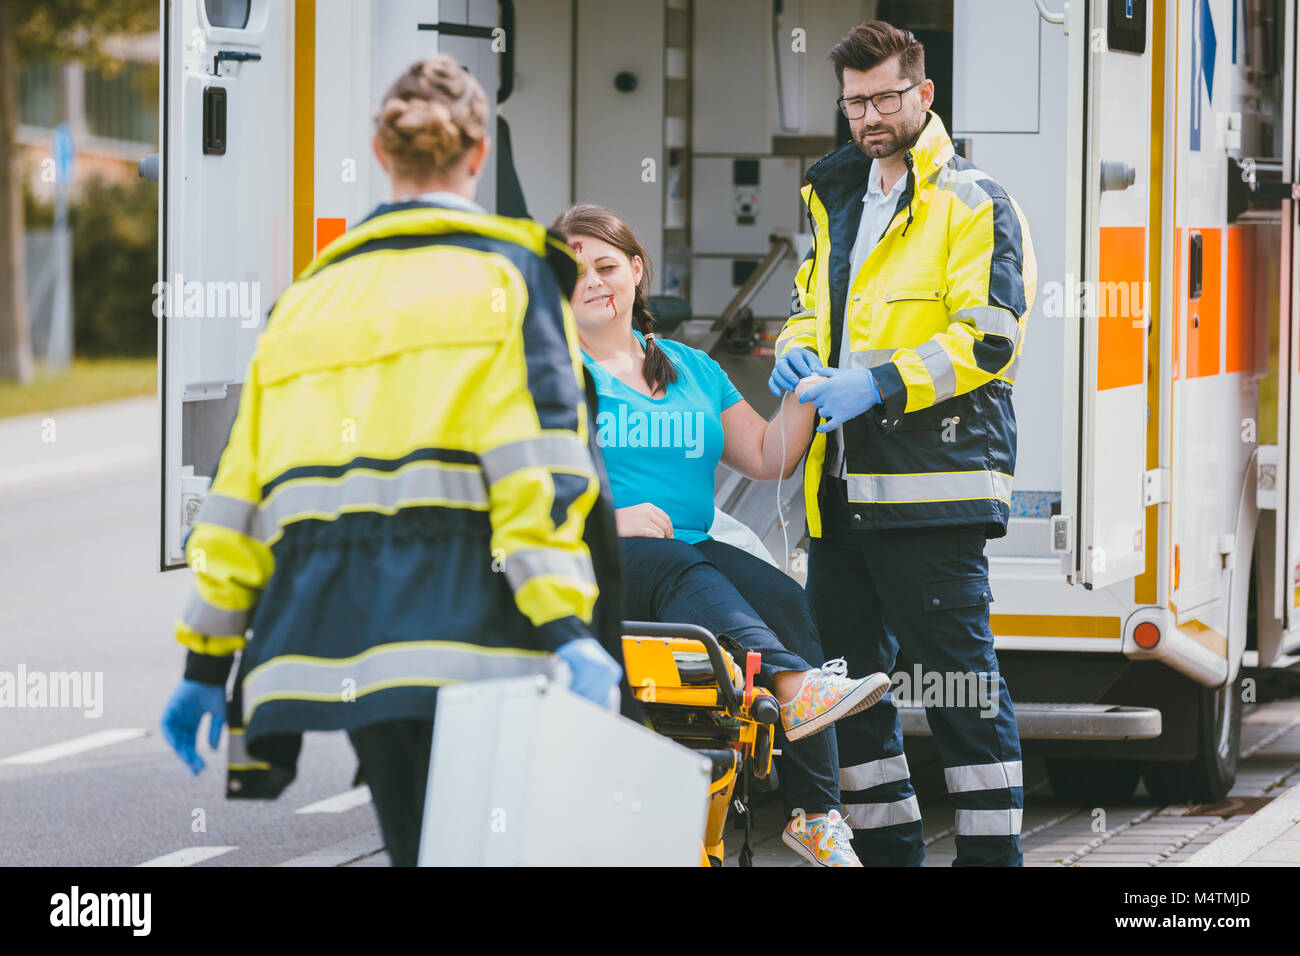 Medic and emergency doctor approaching site of accident Stock Photo